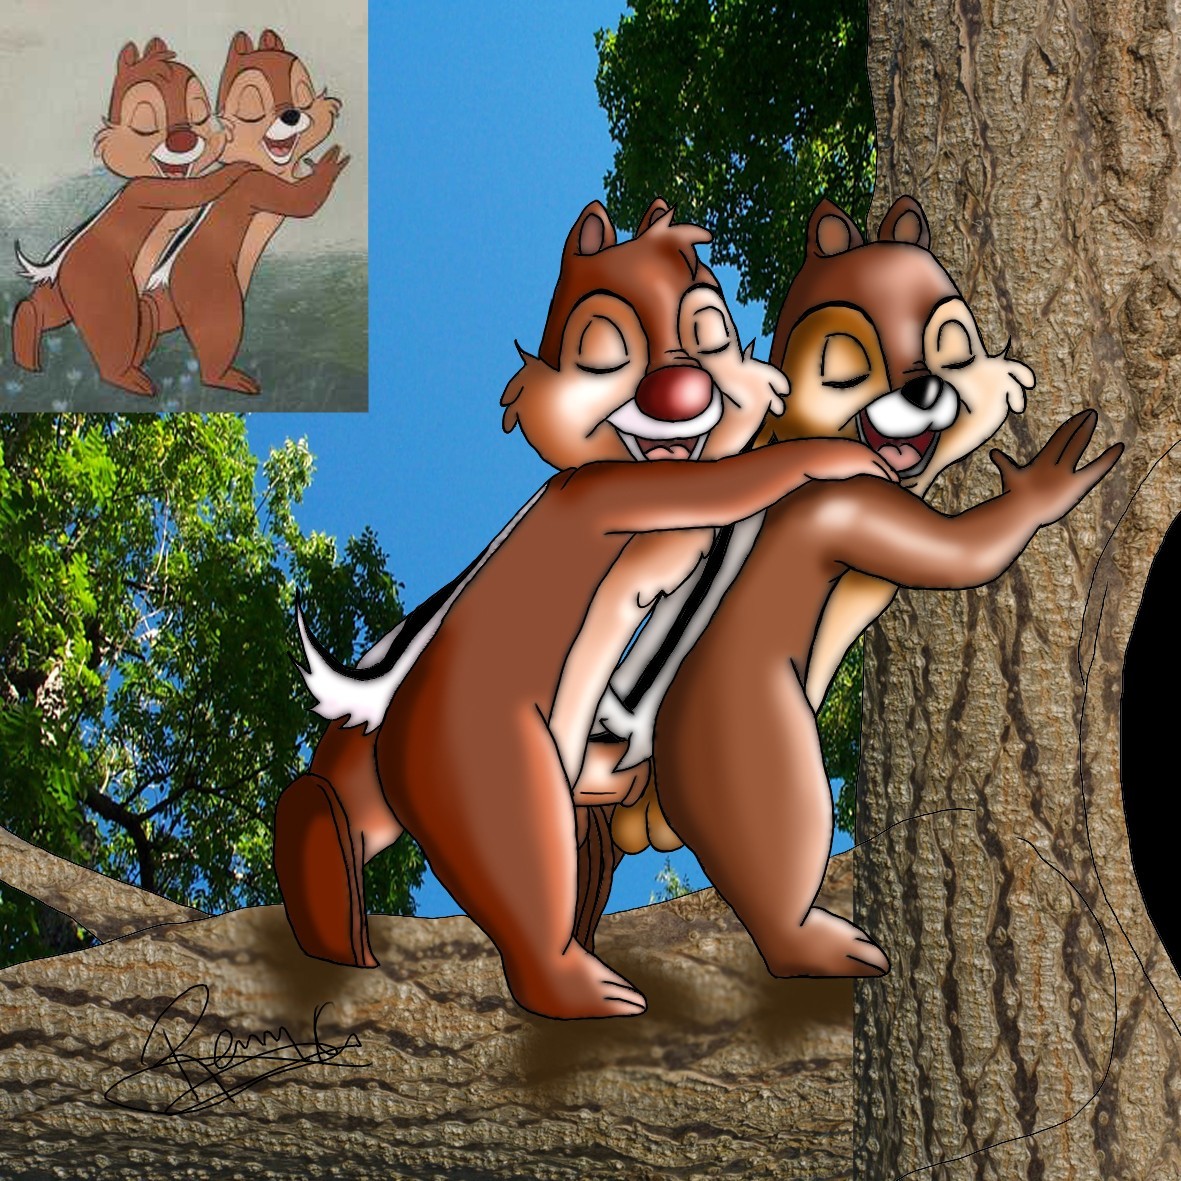 Chip and dale gay porn